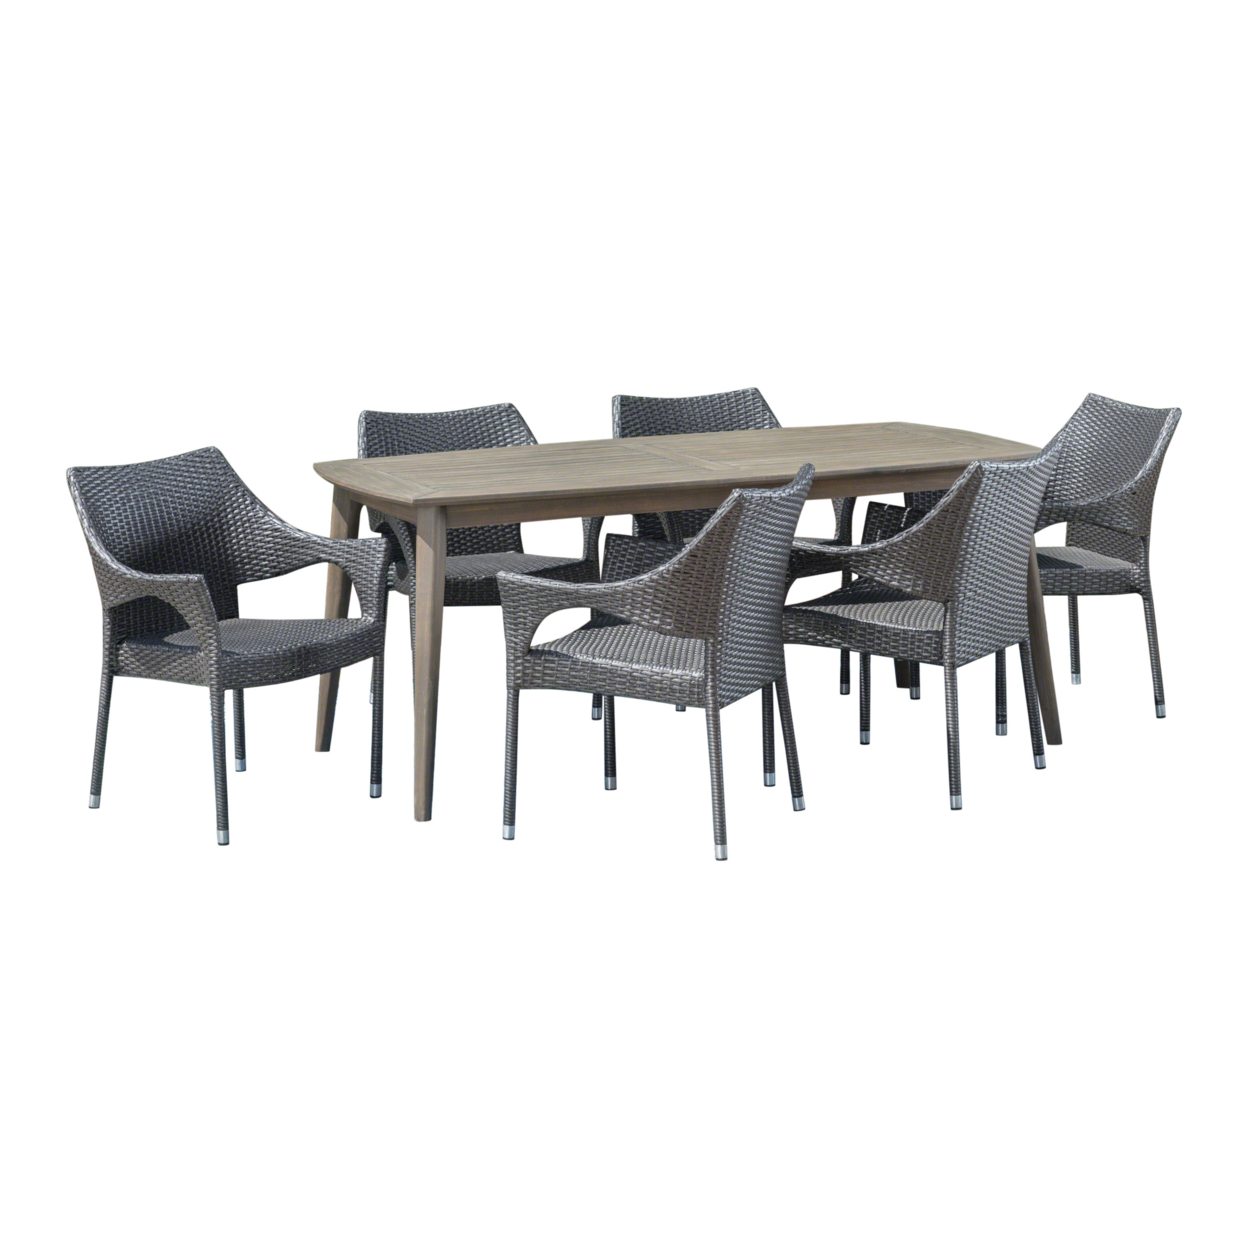 Kado Outdoor 7 Piece Wood And Wicker Dining Set, Gray And Gray